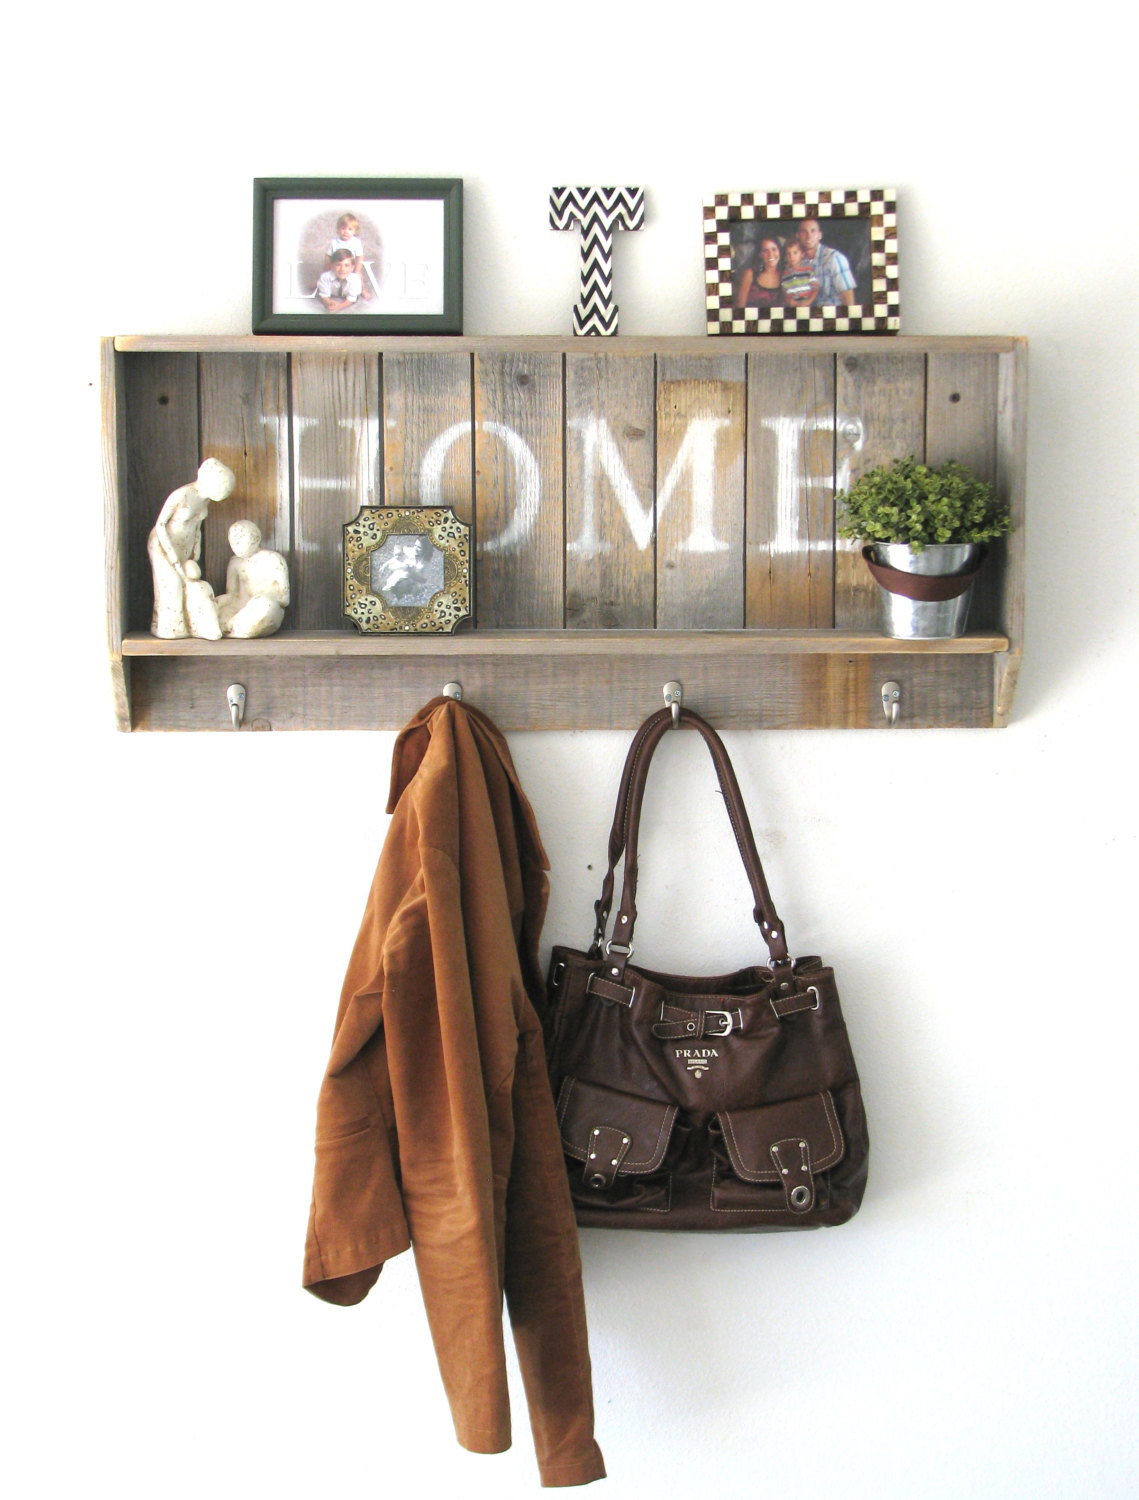 Entry Way Storage Shelf, Multi-purpose Shelf - natural with white letters